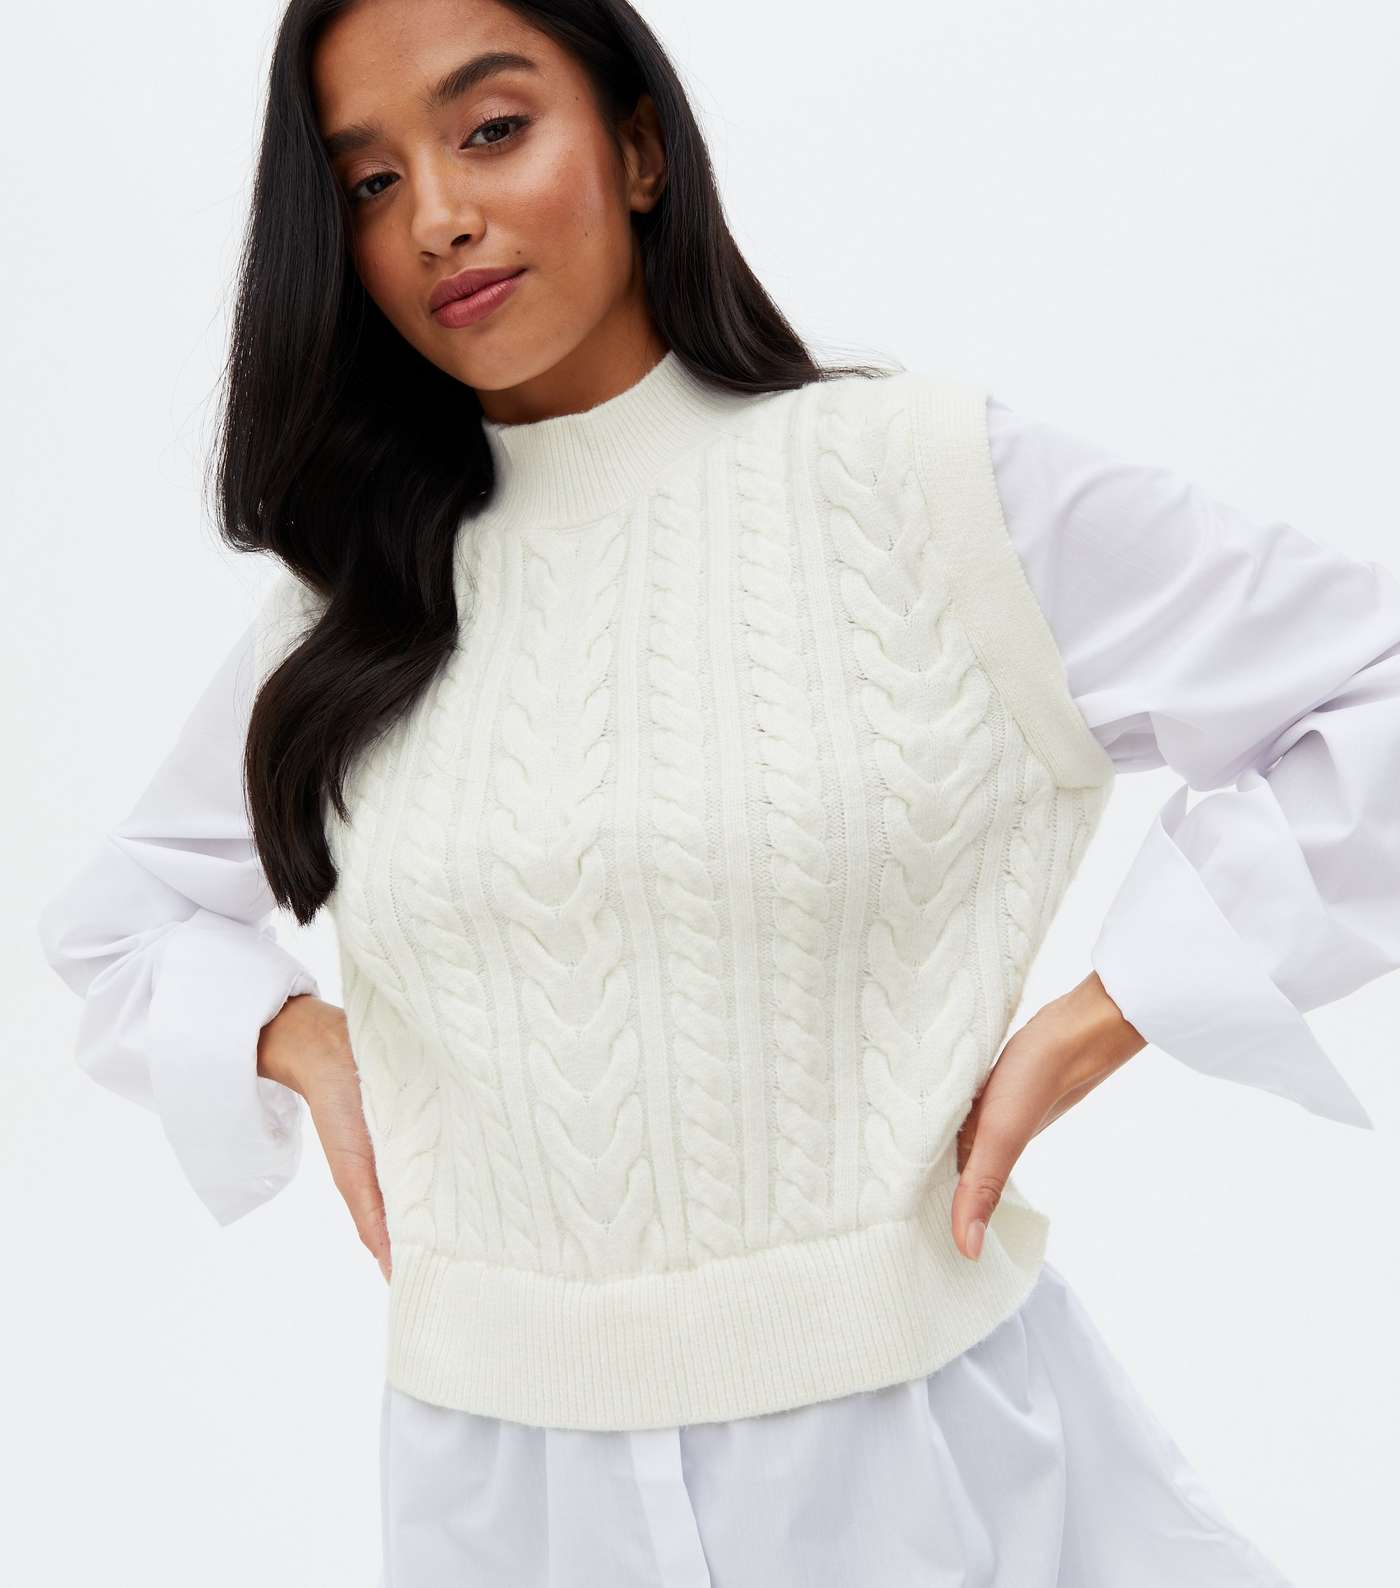 Petite Cream Cable Knit 2-in-1 Vest Jumper Shirt Image 3